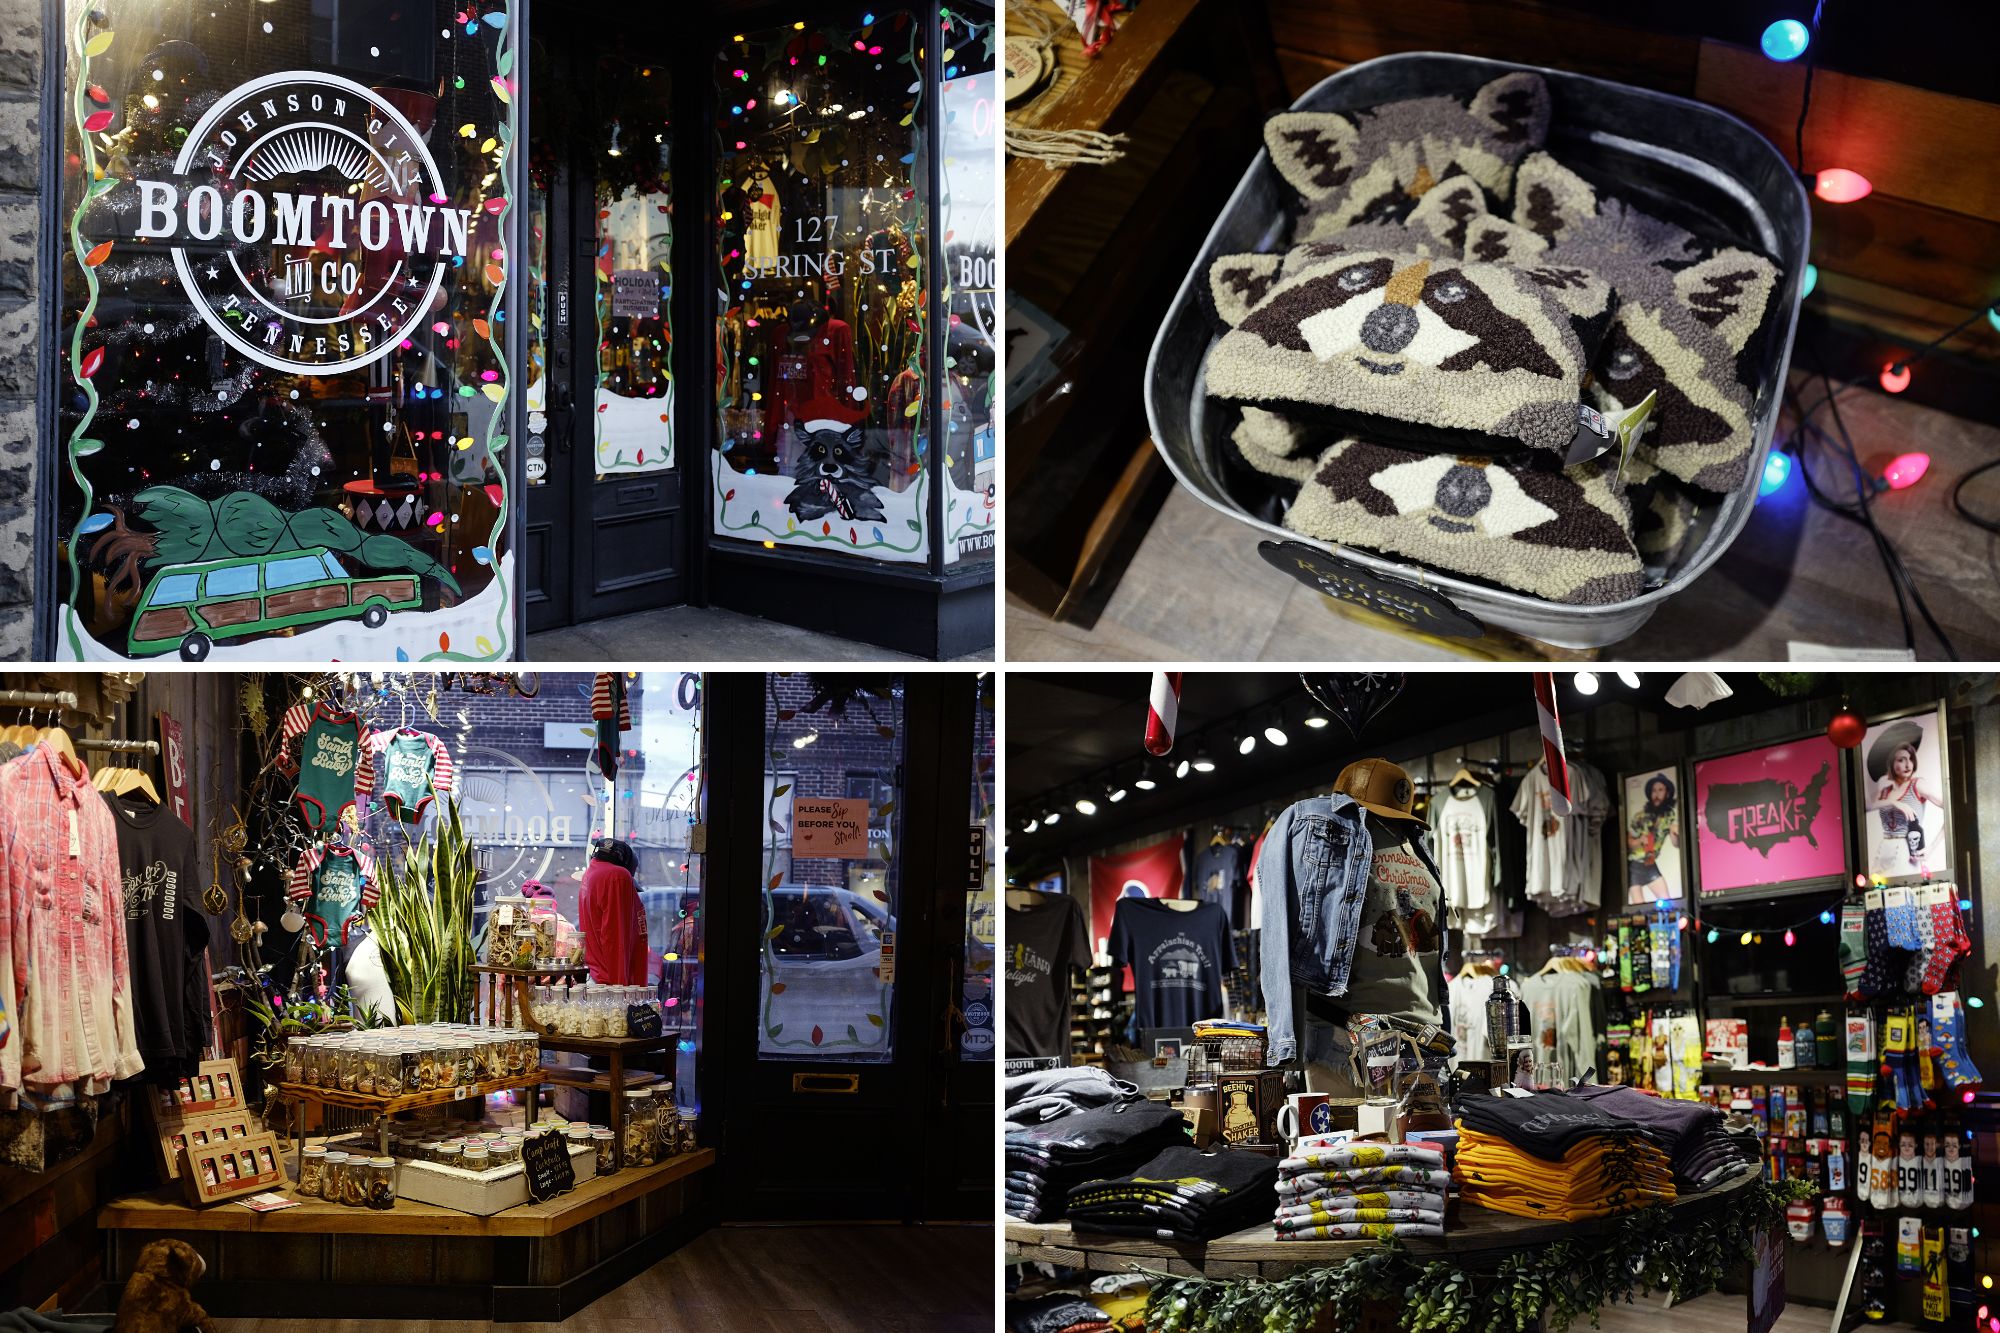 Collage of images of the exterior and products sold at Boomtown and Co